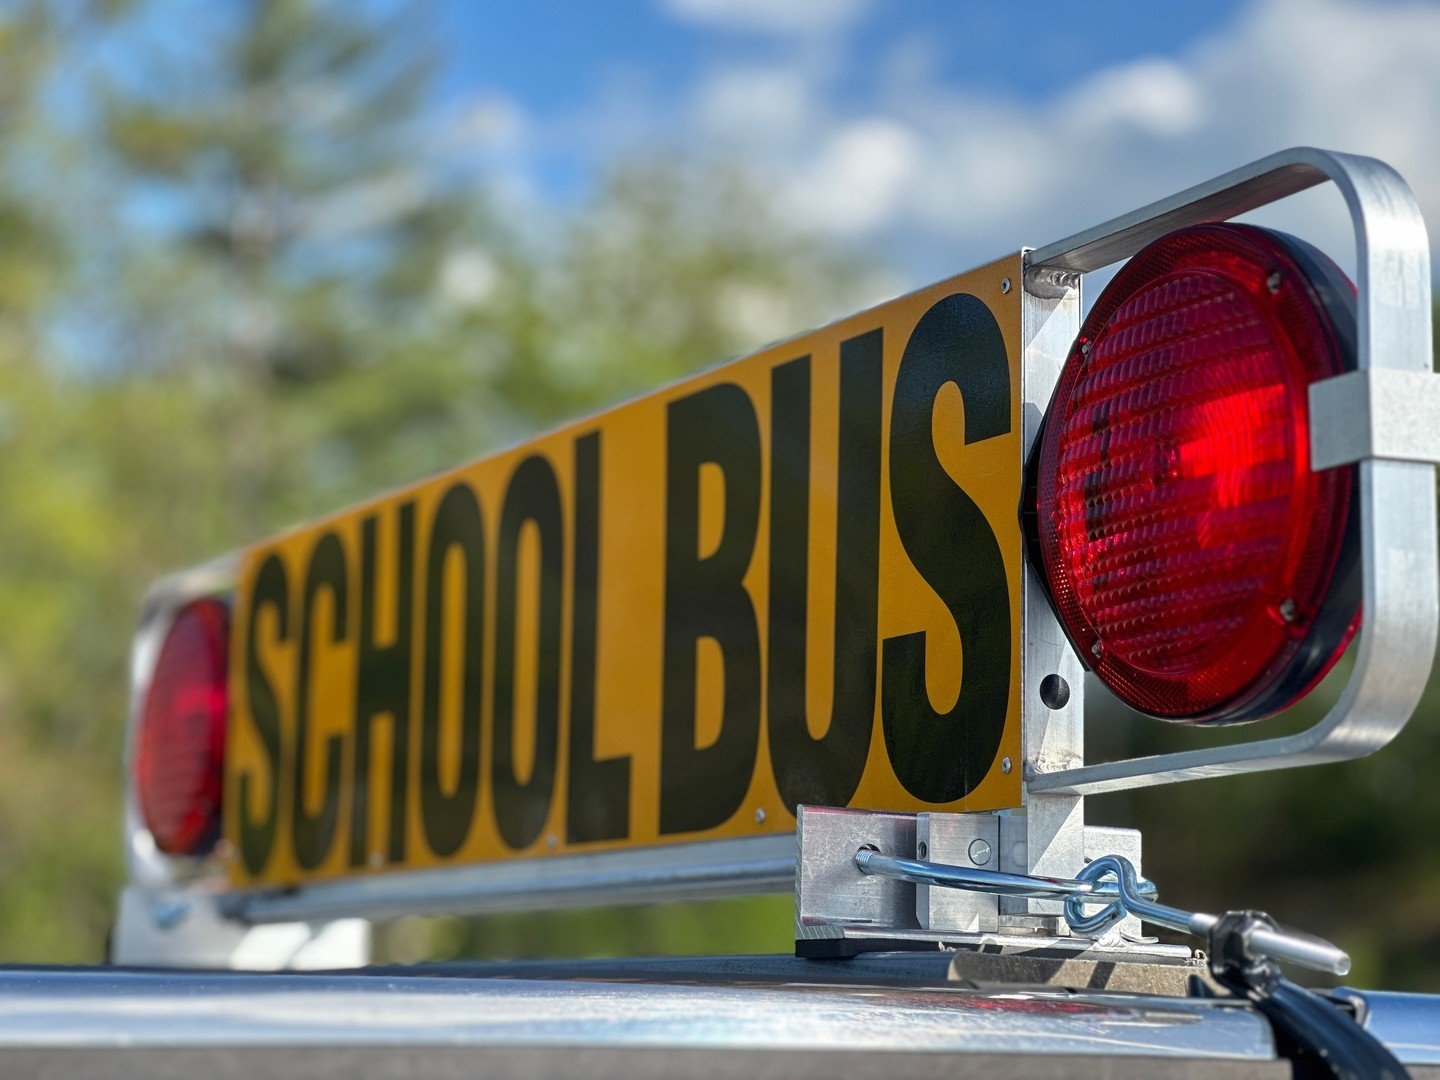 Did you know your town may pay for your child's transportation? 🚌

Transportation is a related service of the IDEA regulations and can include:

🛞 Travel to and from school and between schools
🛞 Travel in and around school buildings
🛞 Specialized